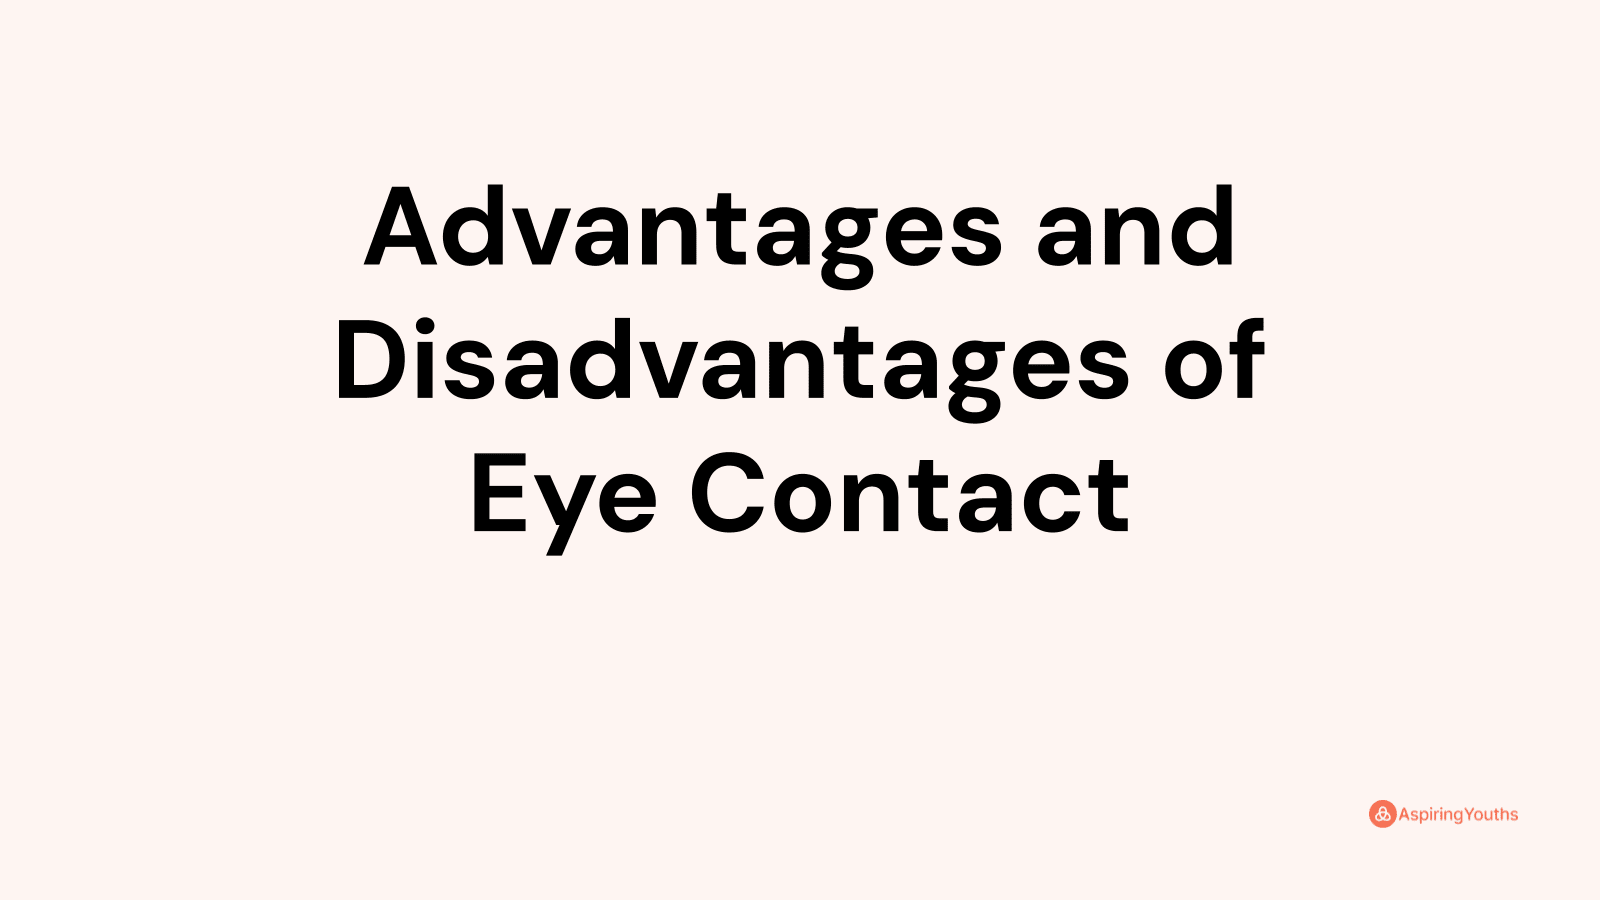 Advantages and disadvantages of Eye Contact